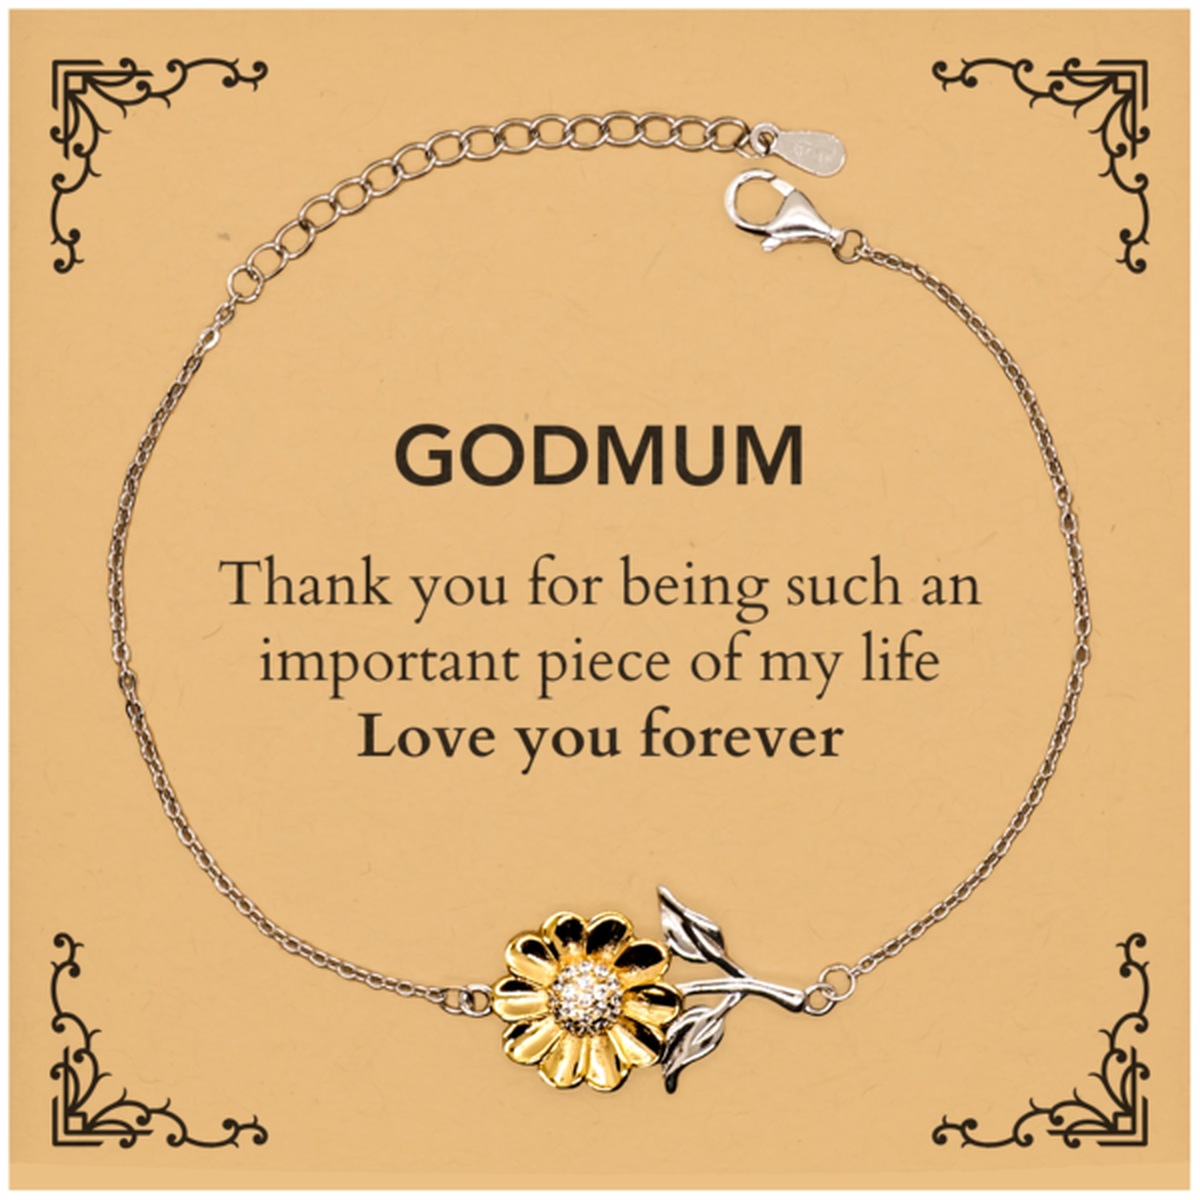 Appropriate Godmum Sunflower Bracelet Epic Birthday Gifts for Godmum Thank you for being such an important piece of my life Godmum Christmas Mothers Fathers Day